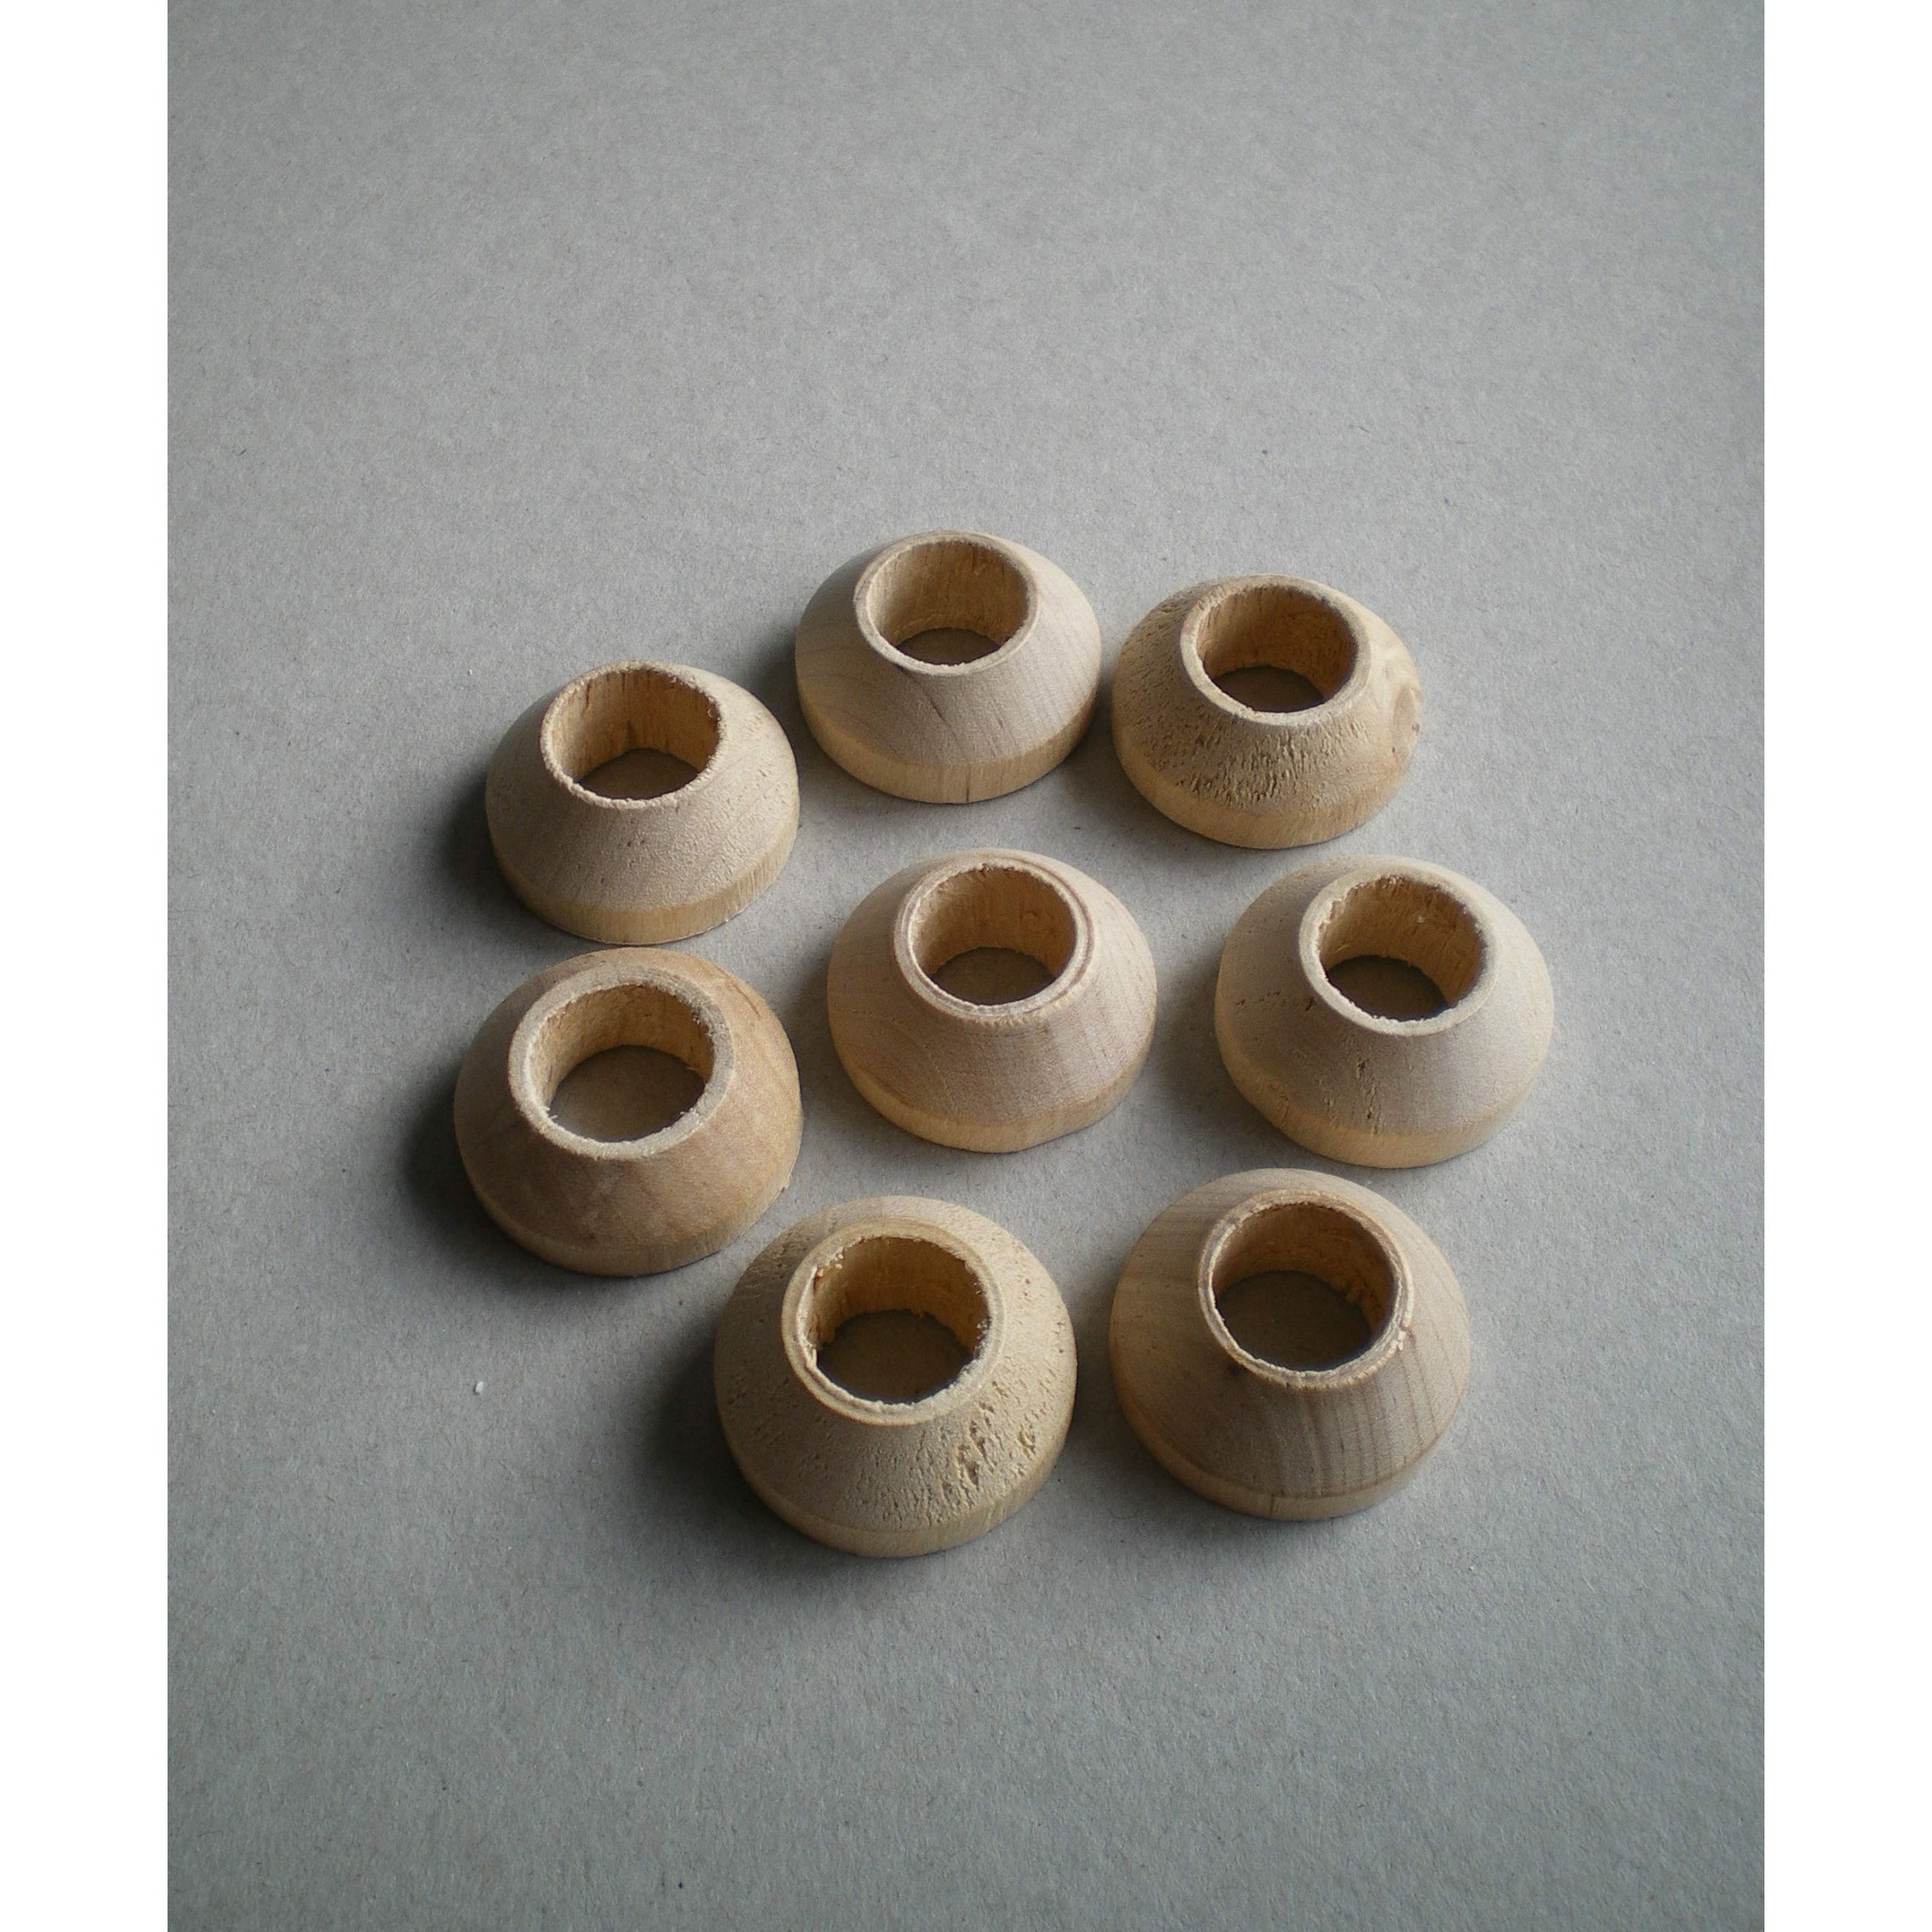 Comfy Clean 24pc Wooden Dolly Pegs